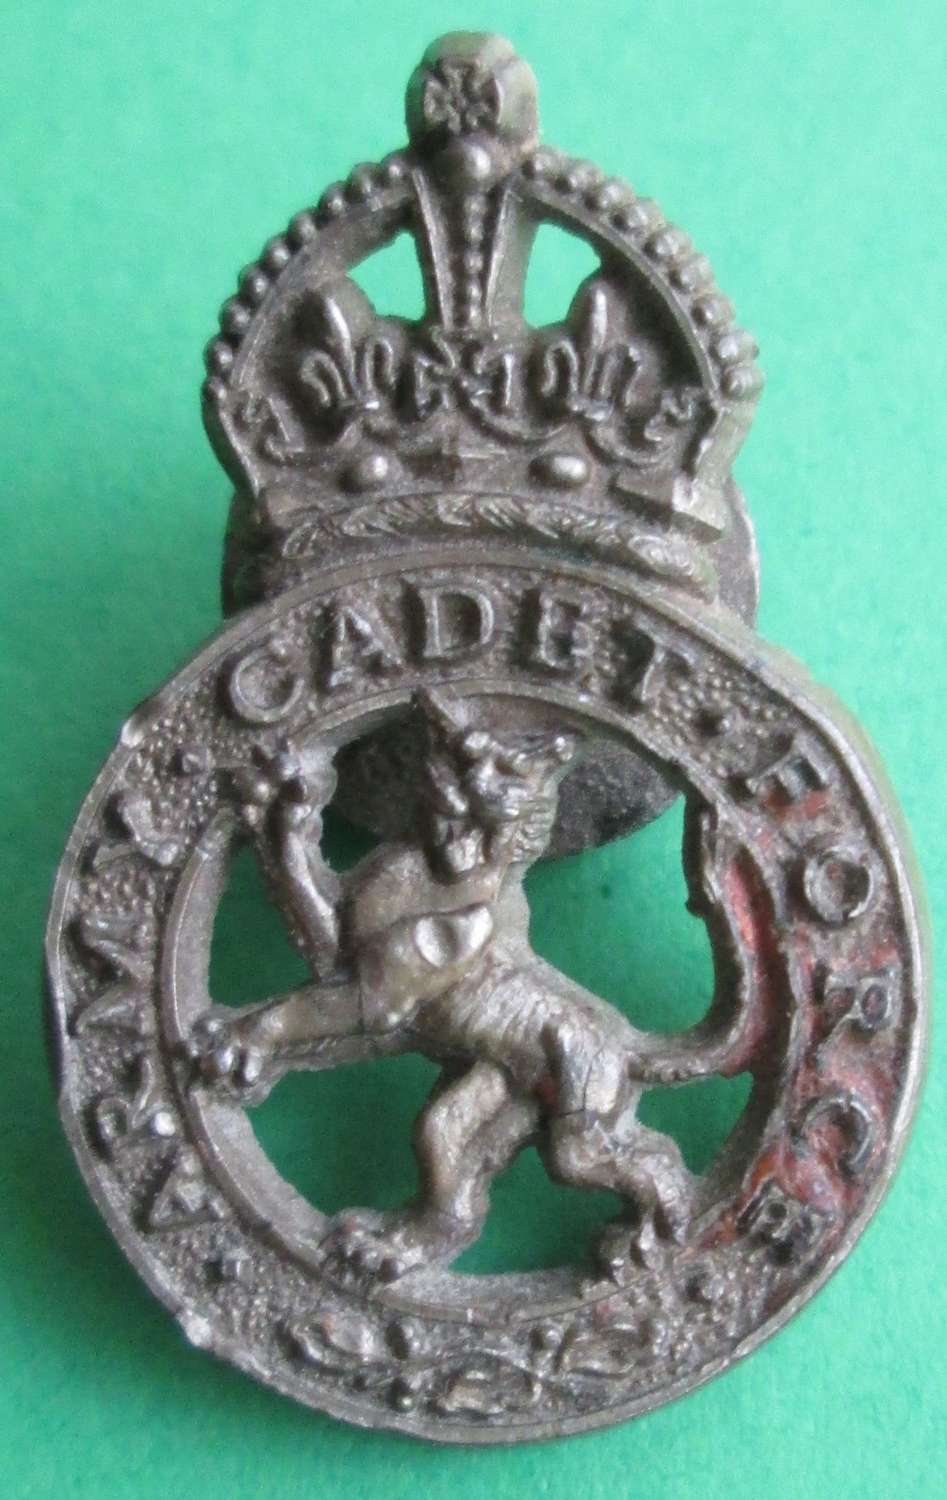 ARMY CADET FORCE BADGE